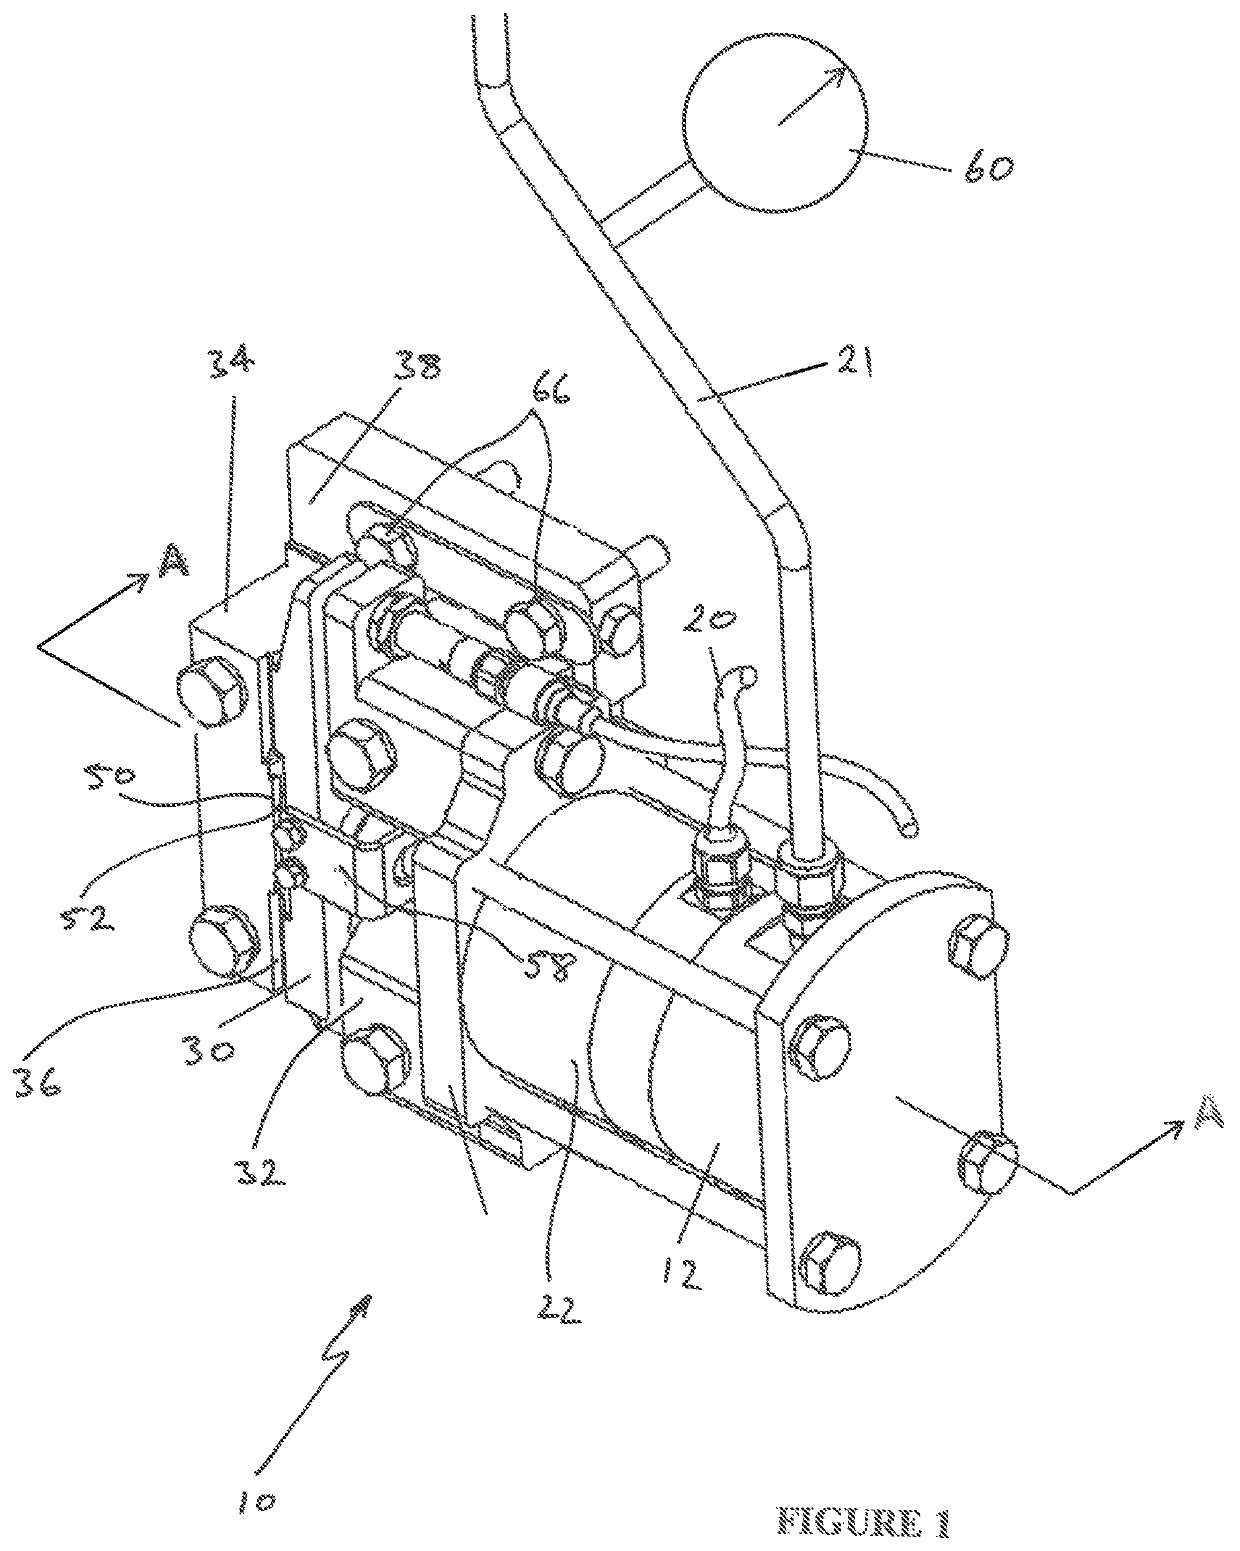 Safety apparatus for protecting an operator of an electrically powered saw